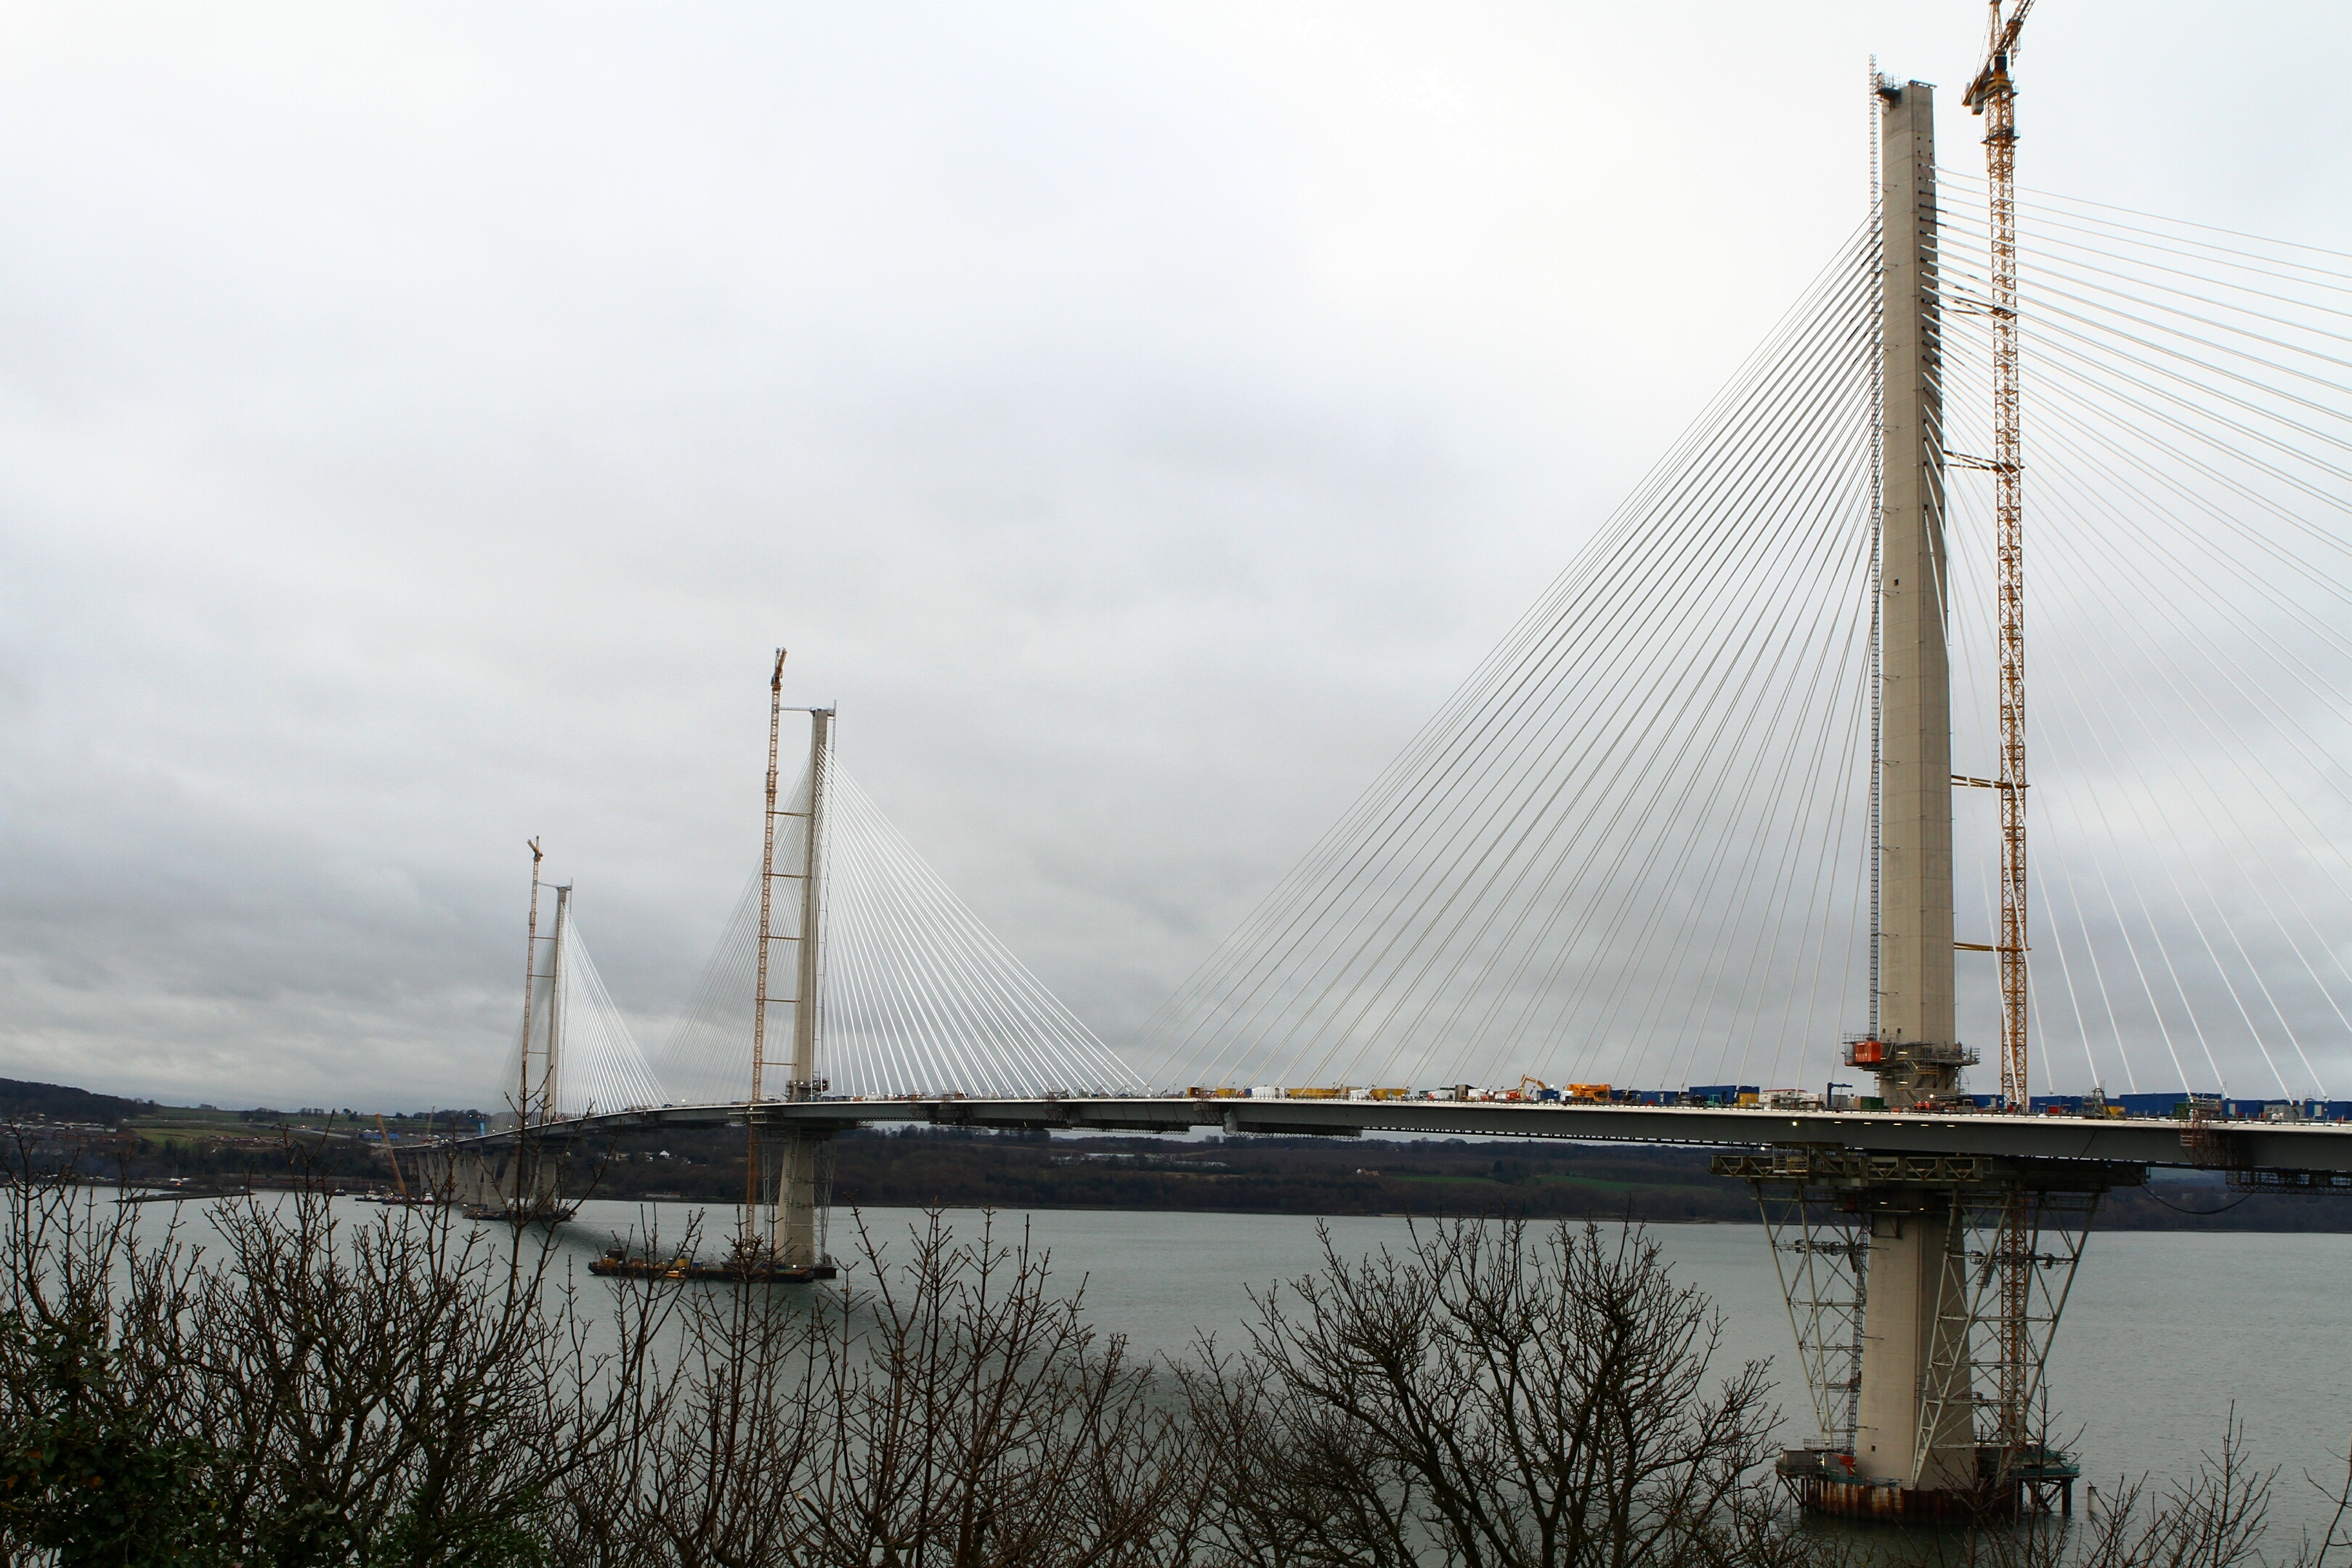 The new Queensferry Crossing viewed from the north side of the River Forth. Tuesday 24th January 2017. (DC Thomson)